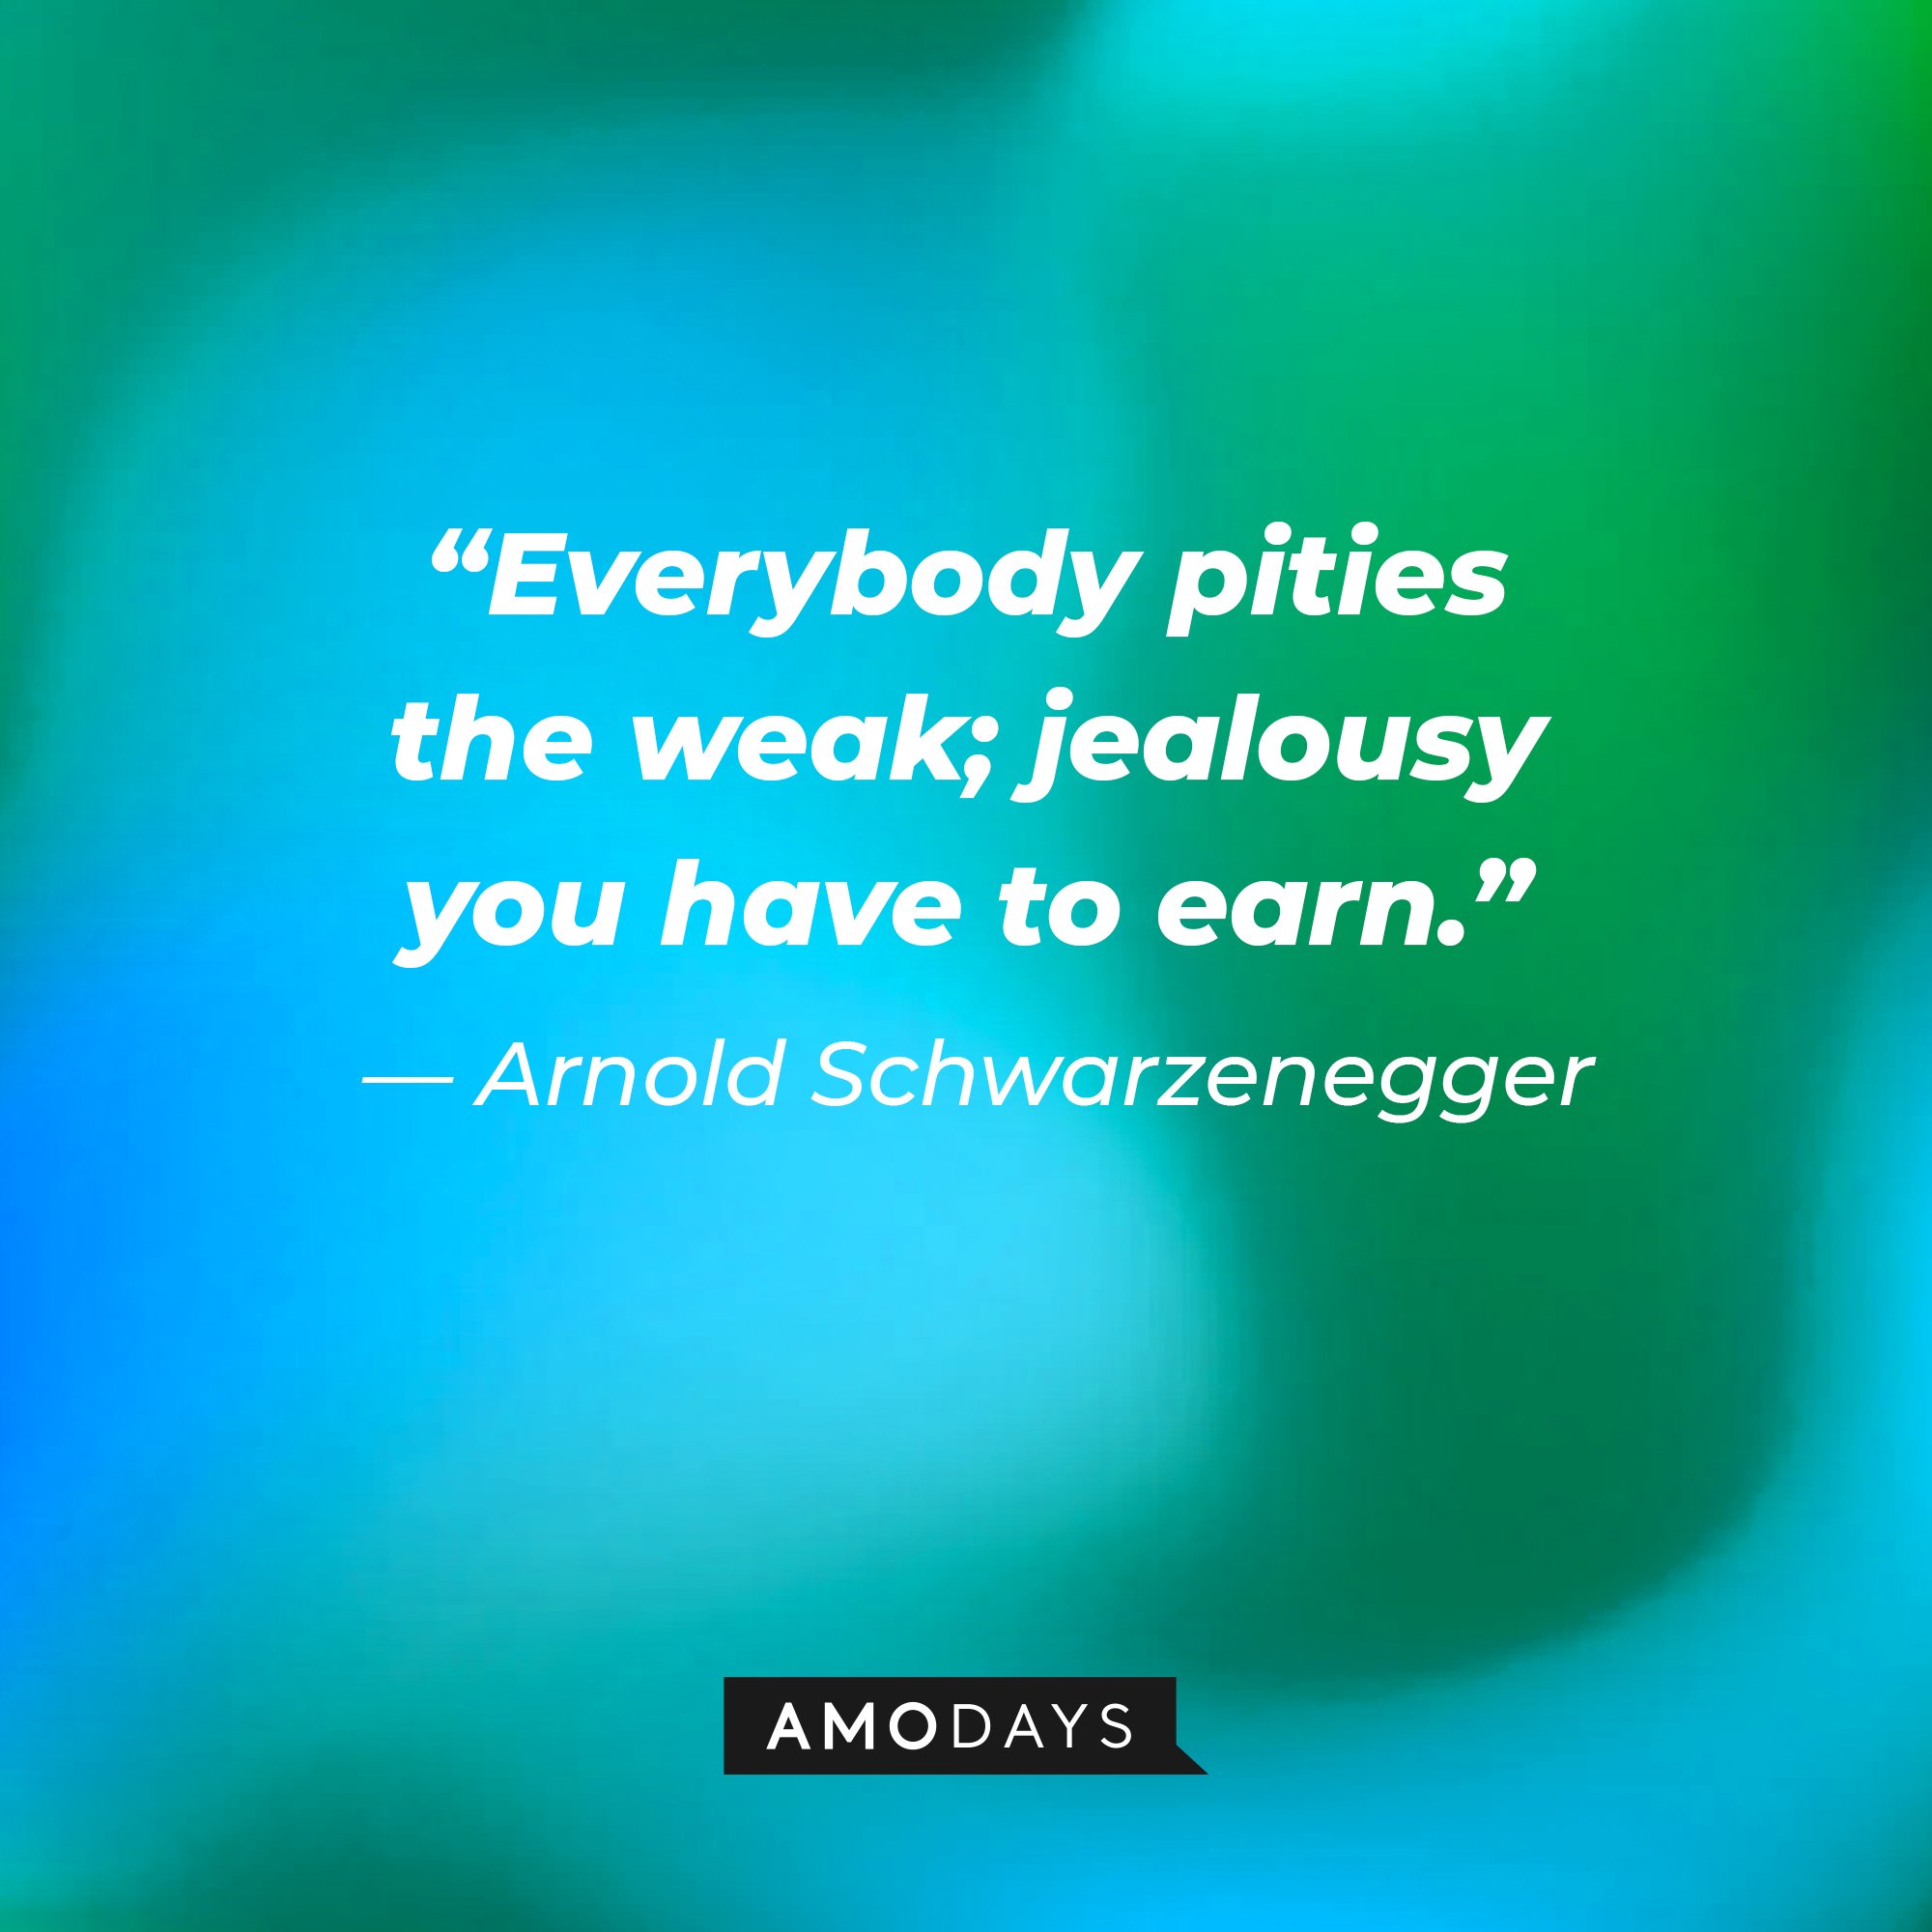  Arnold Schwarzenegger's quote: “Everybody pities the weak; jealousy you have to earn.” | Image: AmoDays